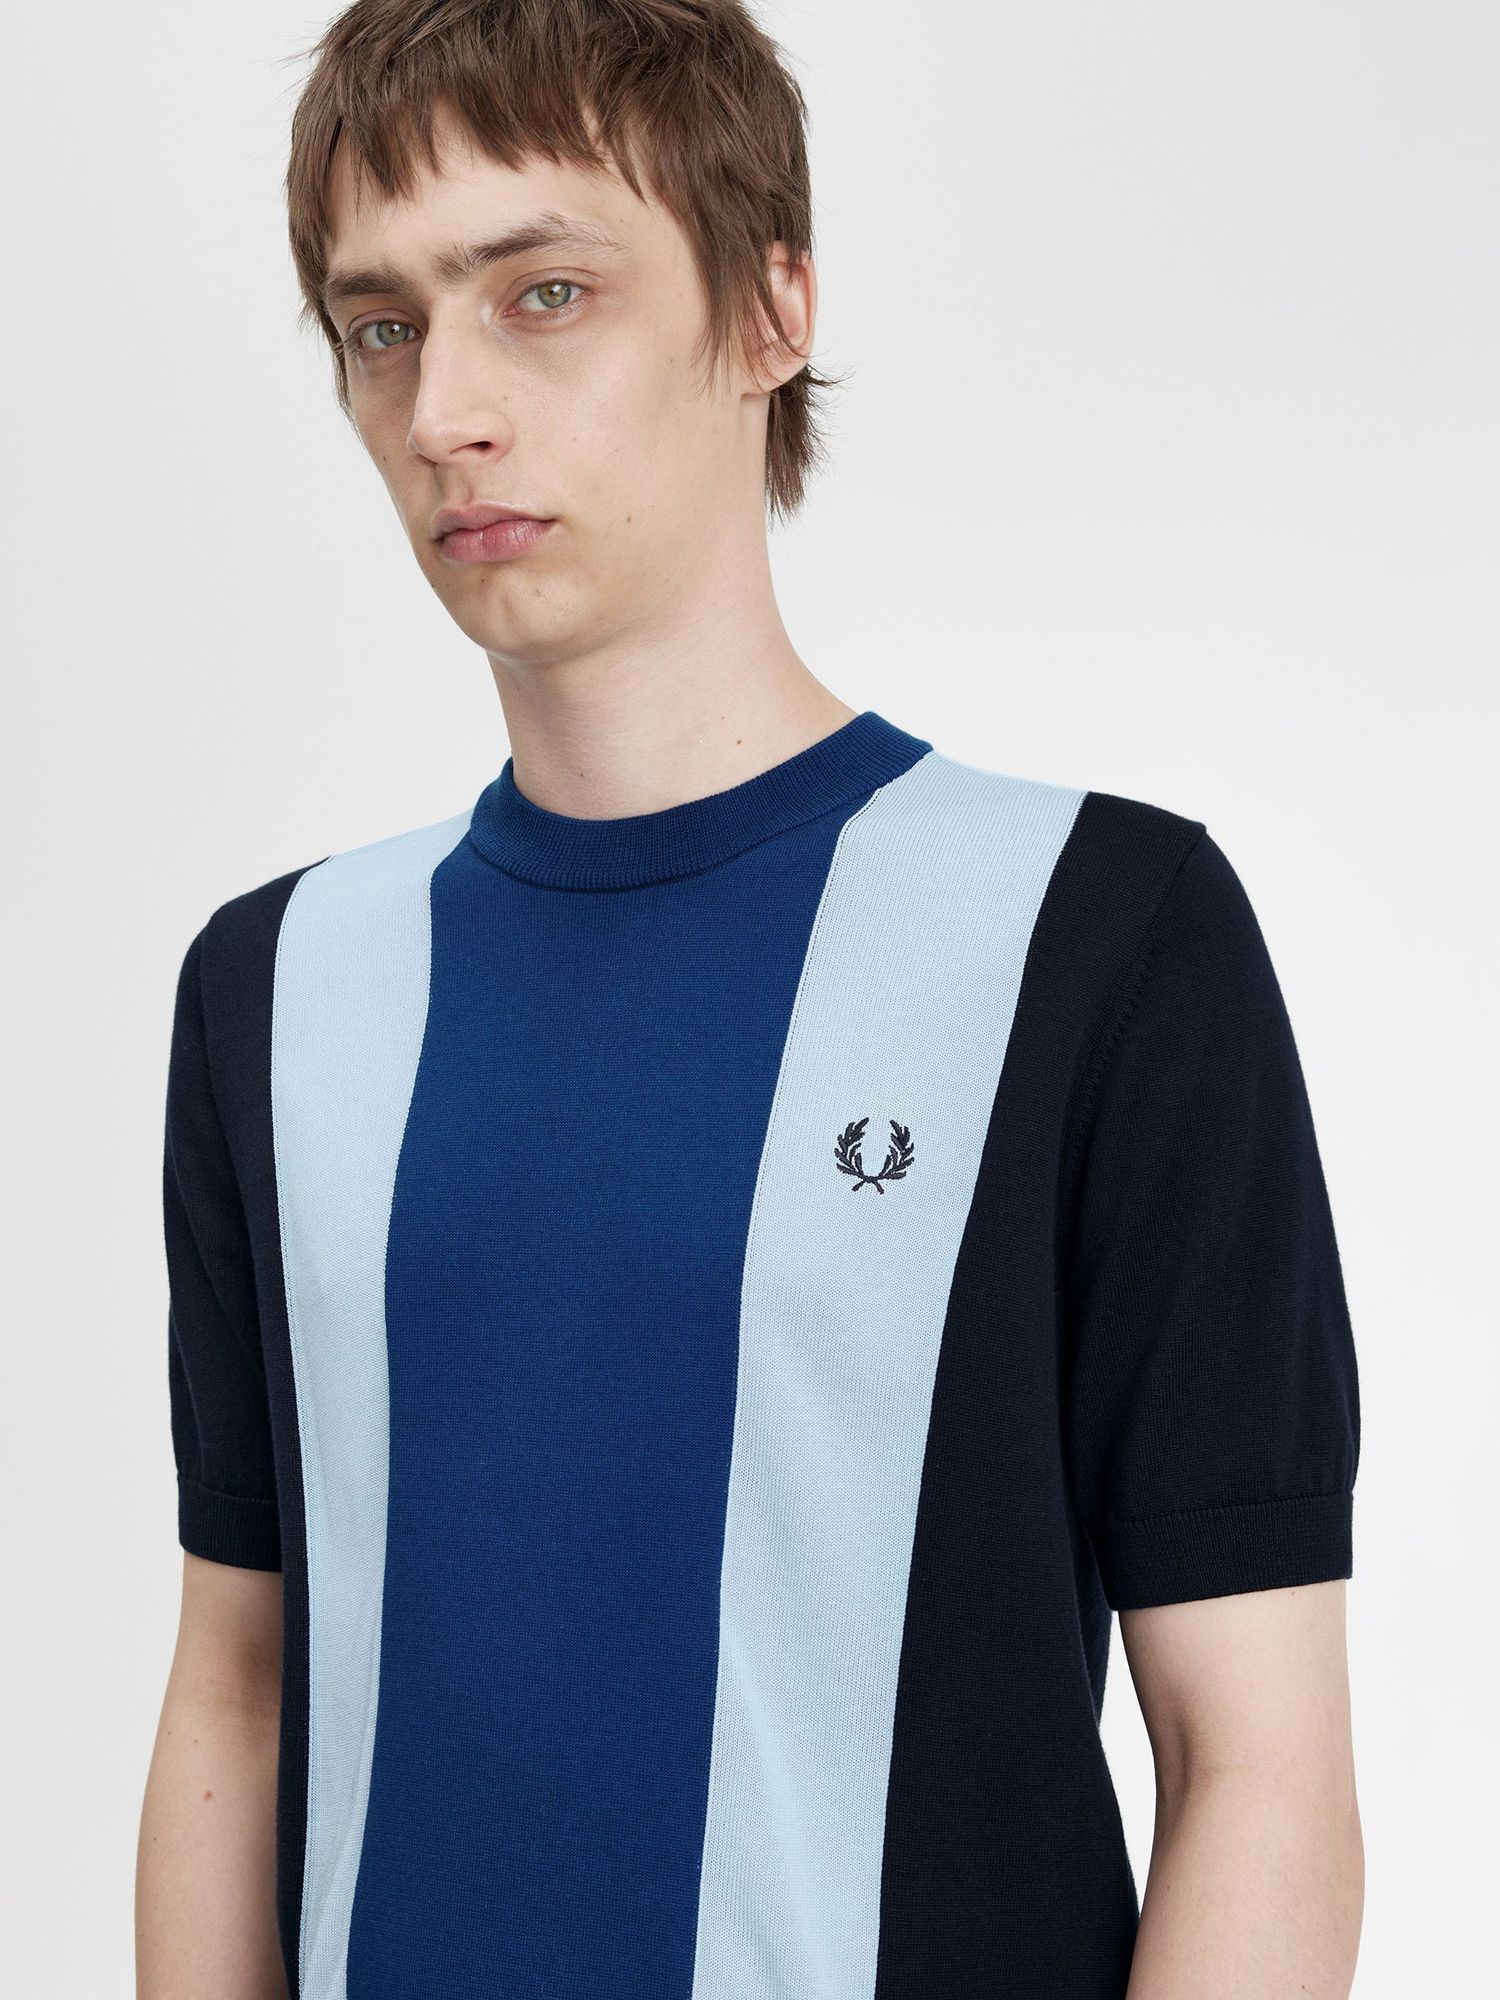 Fred Perry Short Sleeve T-Shirt, Navy/Multi, S